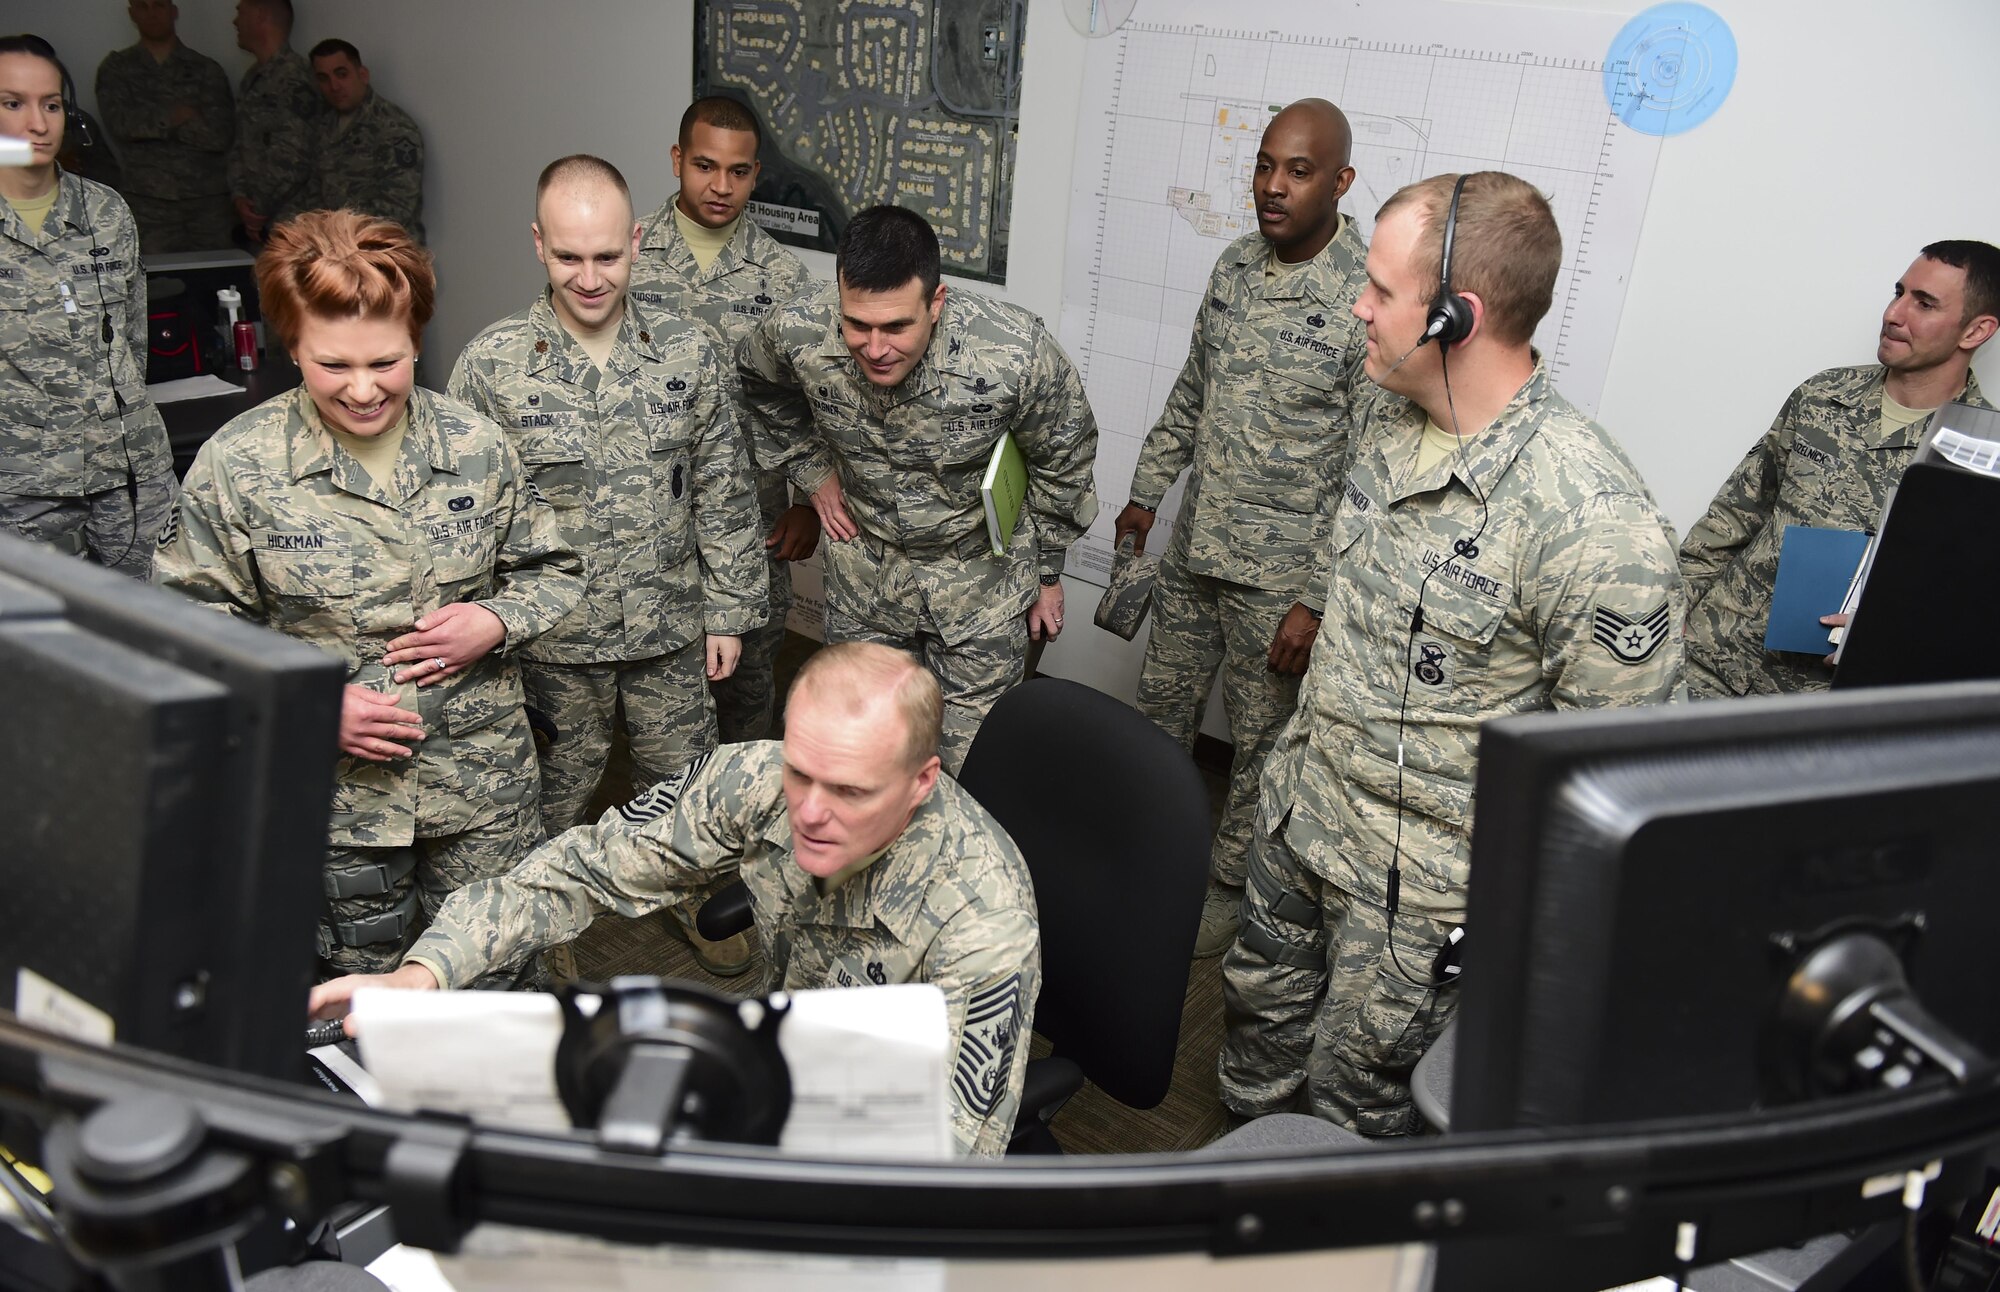 Chief Master Sgt. of the Air Force James A. Cody tests out the new base defense operations center in the 460th Security Forces Squadron March 5, 2015, at Buckley Air Force Base, Colo. Cody toured Buckley AFB and spoke with Airmen on the future of the Air Force. (U.S. Air Force photo/Airman 1st Class Luke W. Nowakowski)